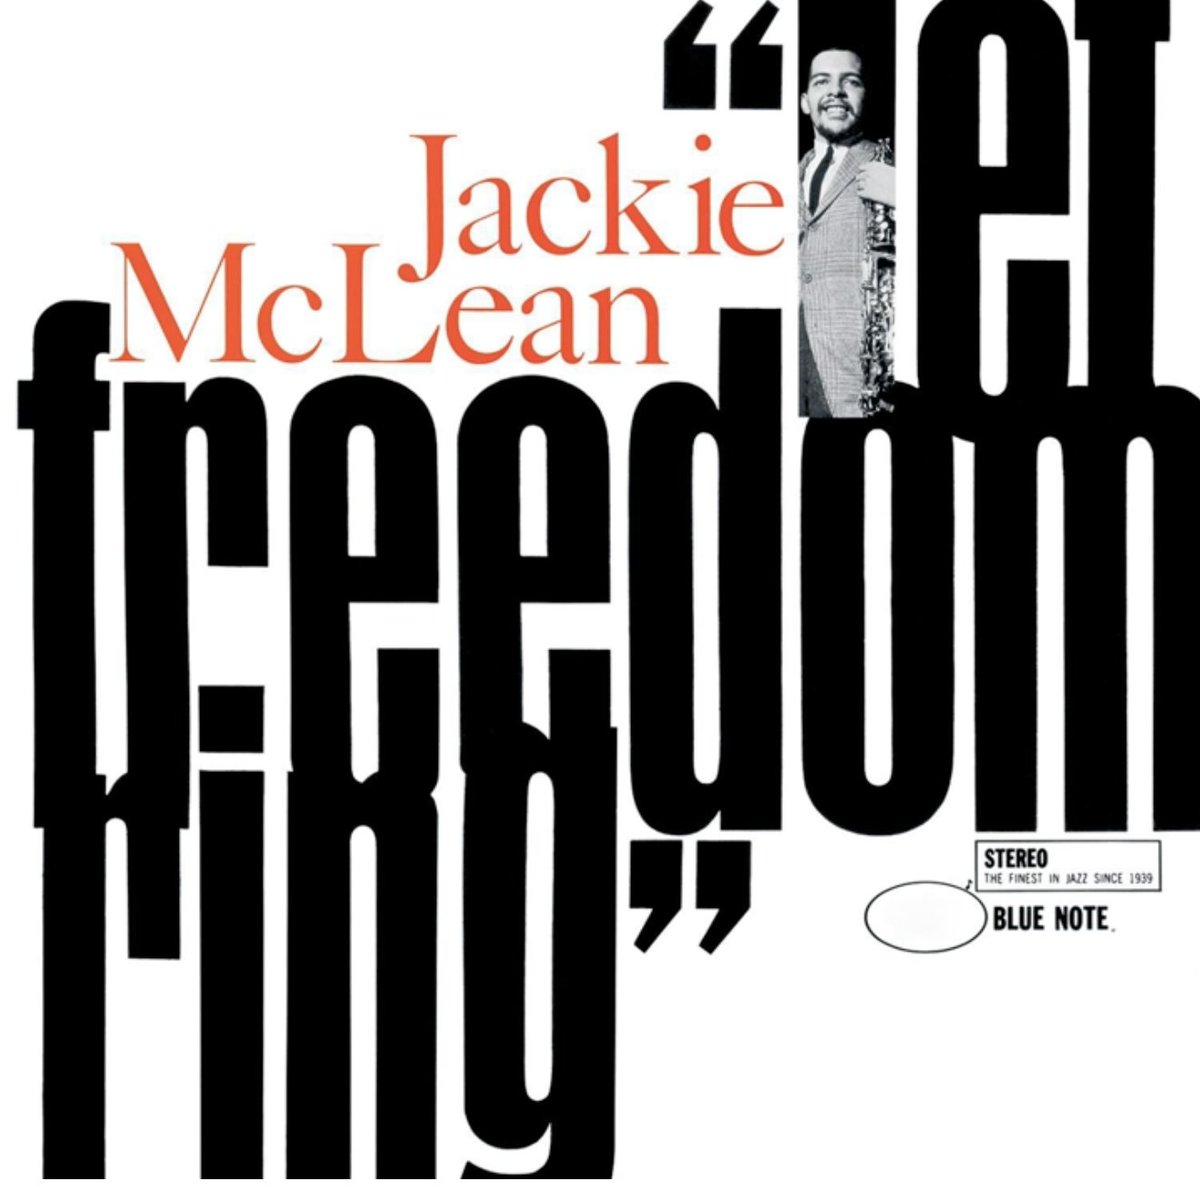 Morning Prayer... Yesterday was the anniversary of the birth of Jackie McLean but today and all days are right to celebrate Jackie. My Dad loved this song. youtube.com/watch?v=e8XZaR… #jazz